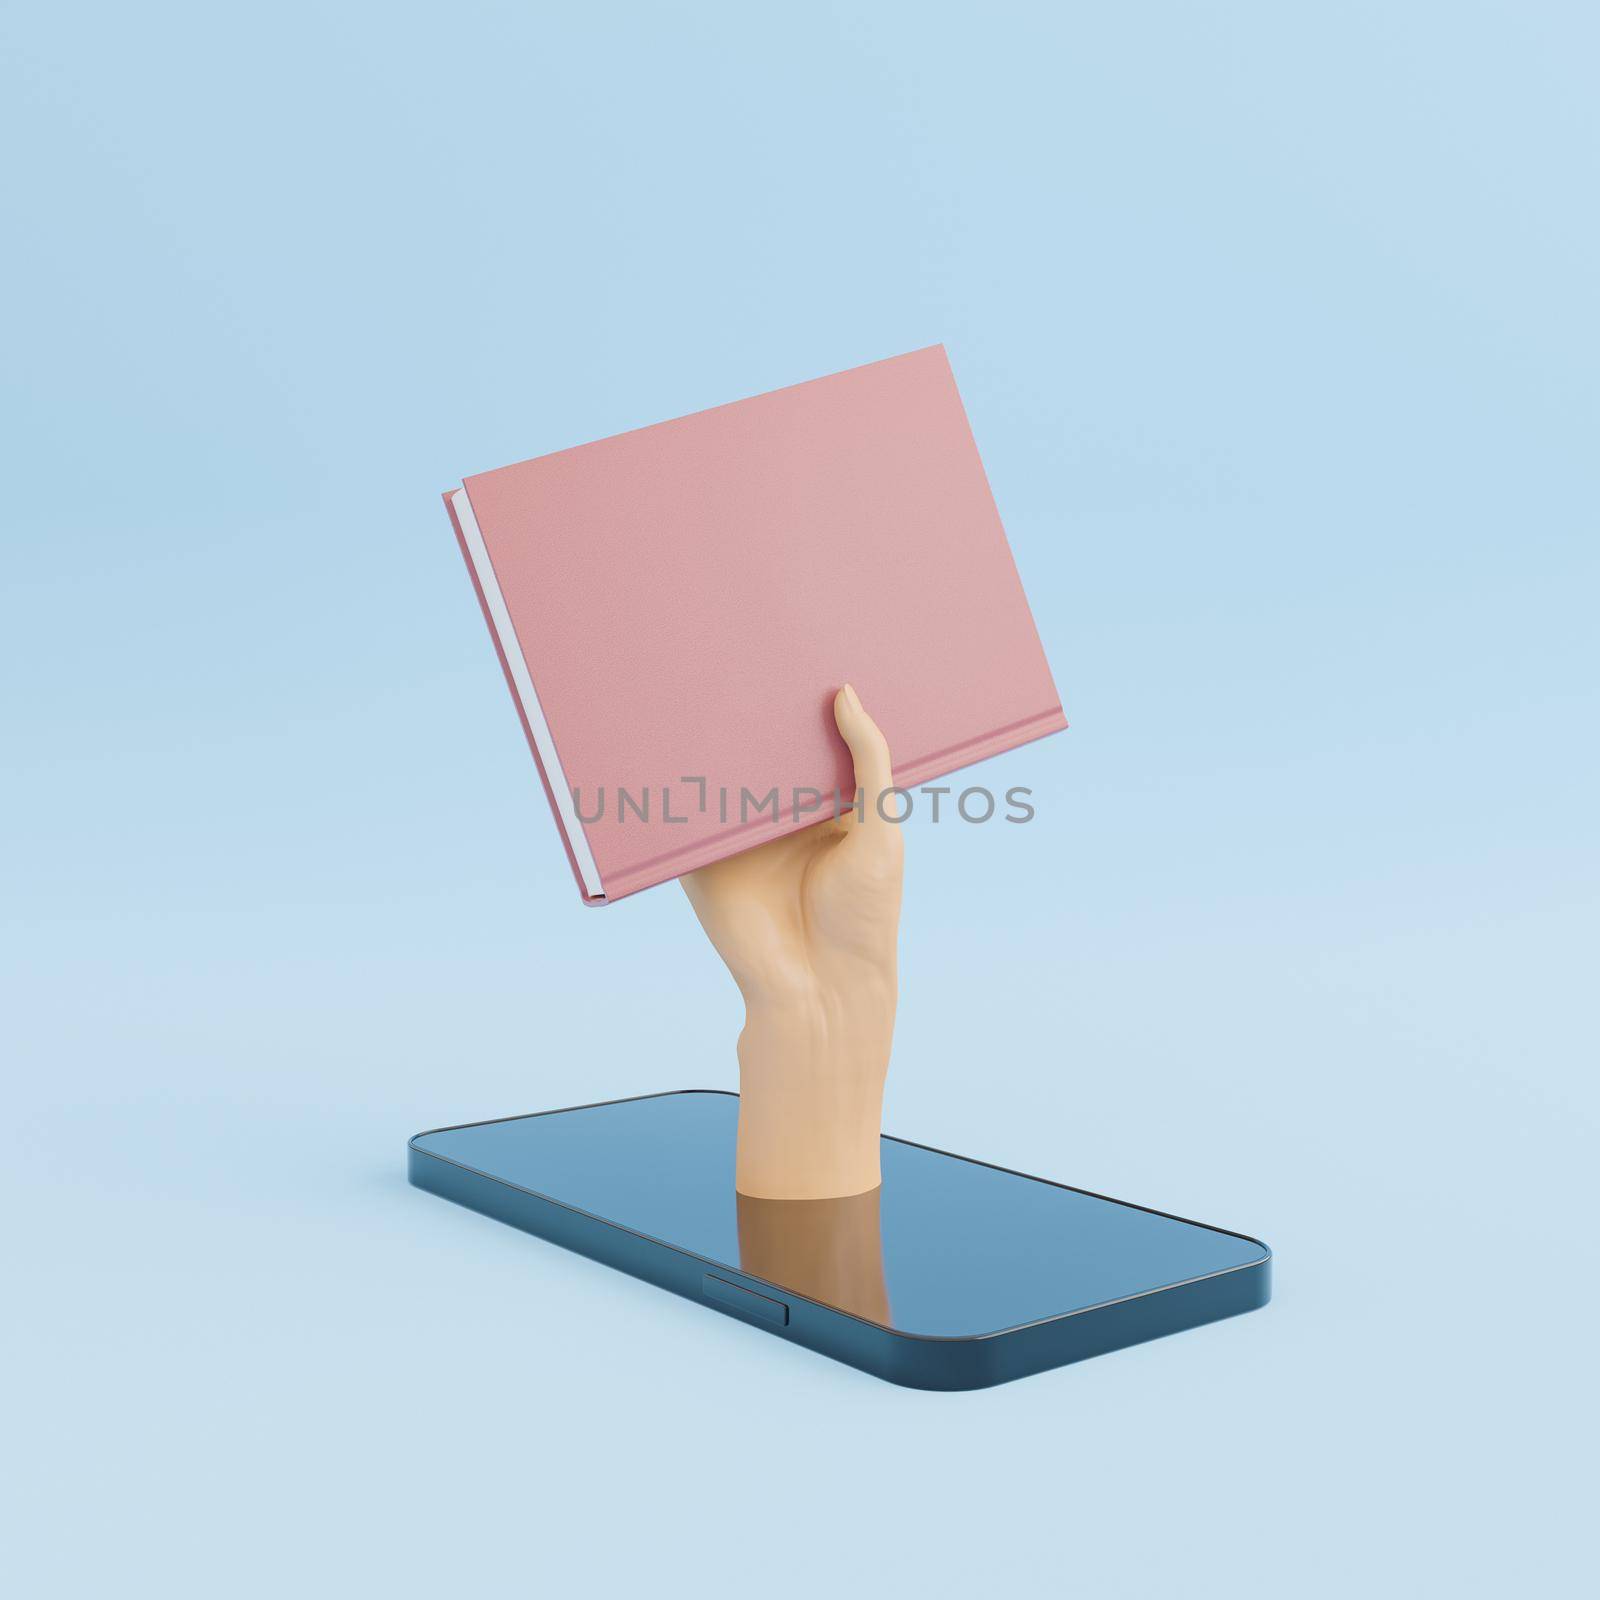 mobile phone with a hand and a book coming out by asolano